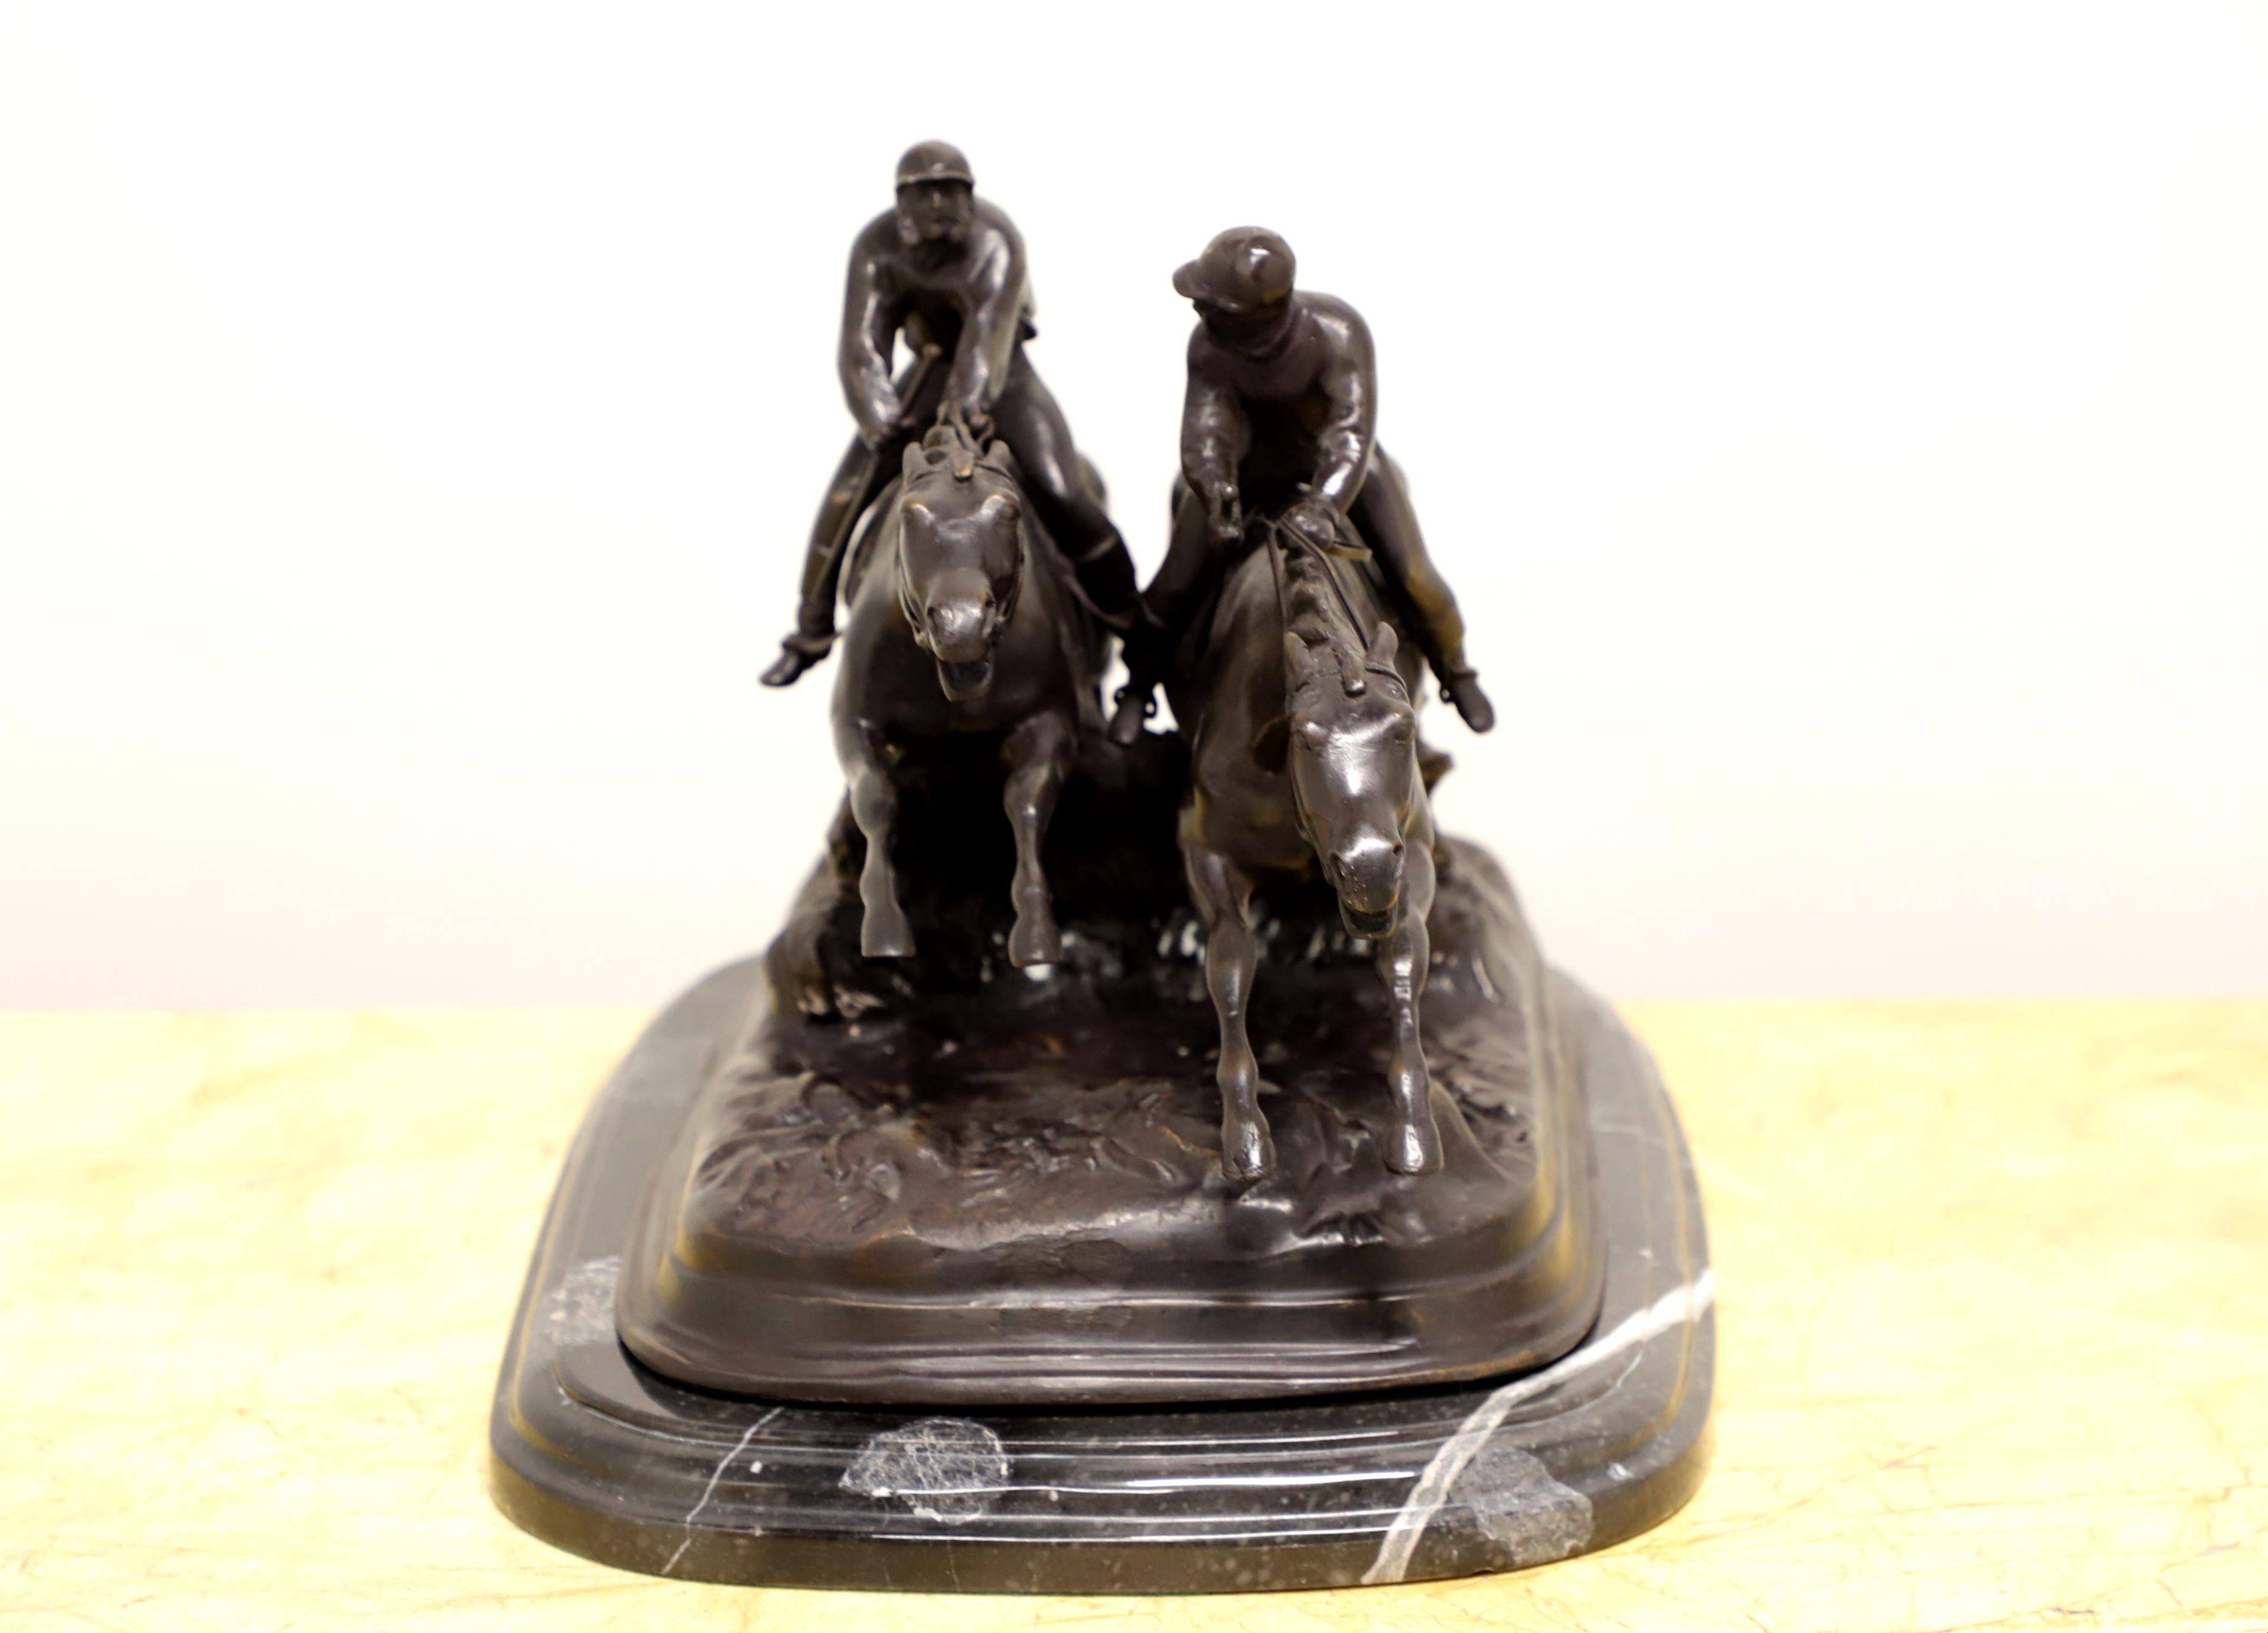 A table top sculpture in bronze depicting two jockeys on racehorses in a steeplechase race jumping an obstacle by Maitland Smith. Bronze terrain, obstacle, horses and jockeys on a marble base. Made in the Philippines, in the late 20th